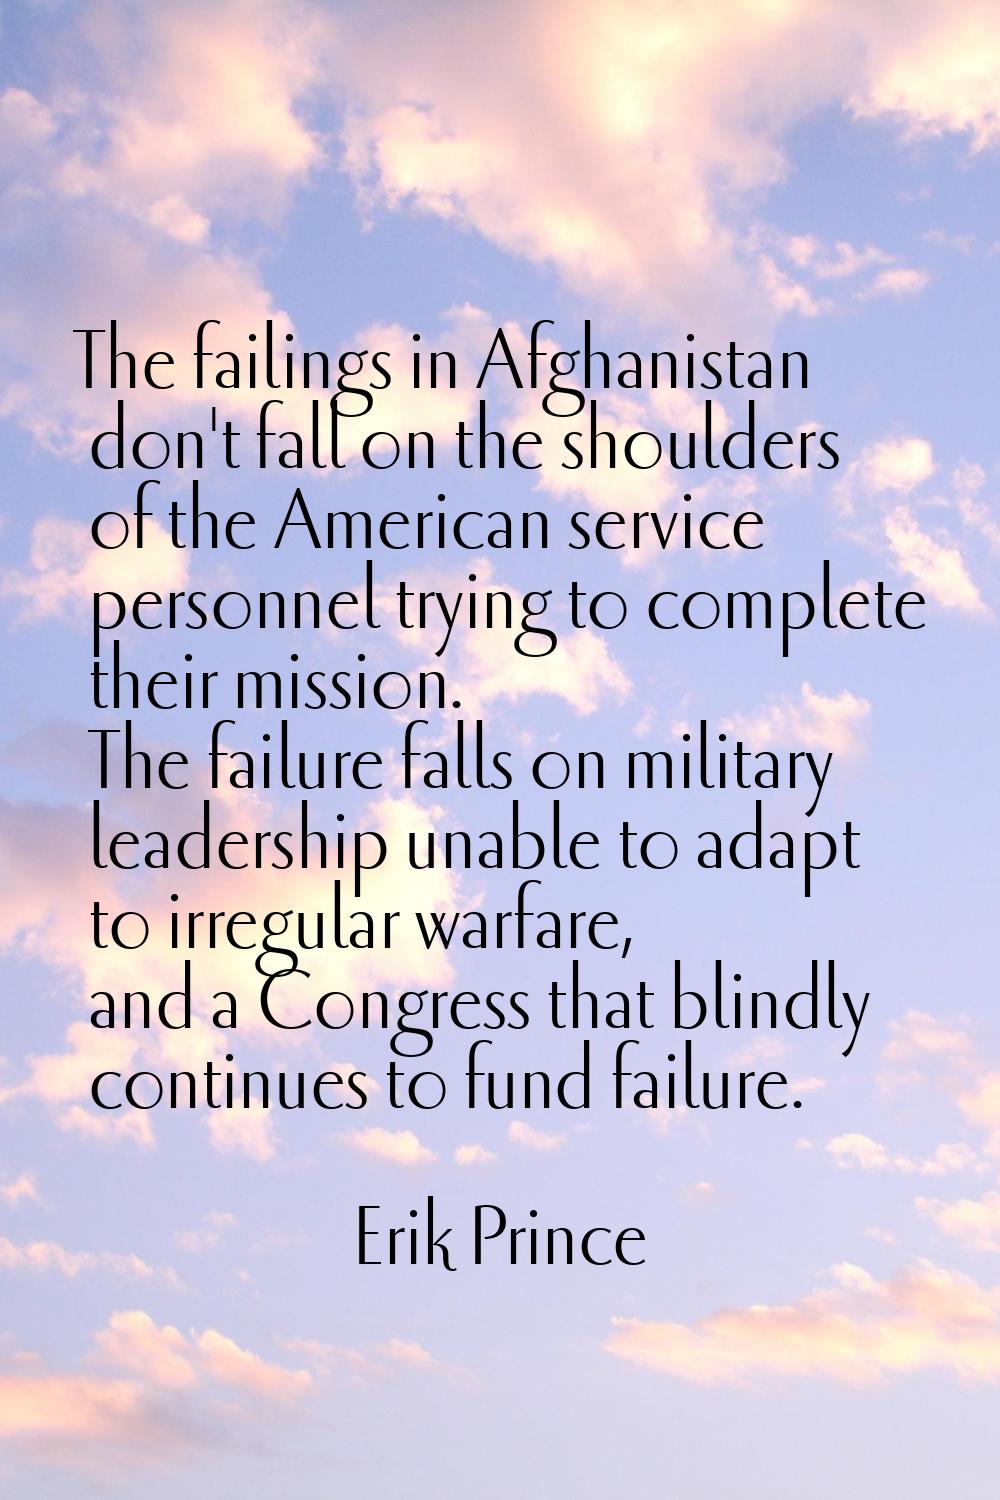 The failings in Afghanistan don't fall on the shoulders of the American service personnel trying to